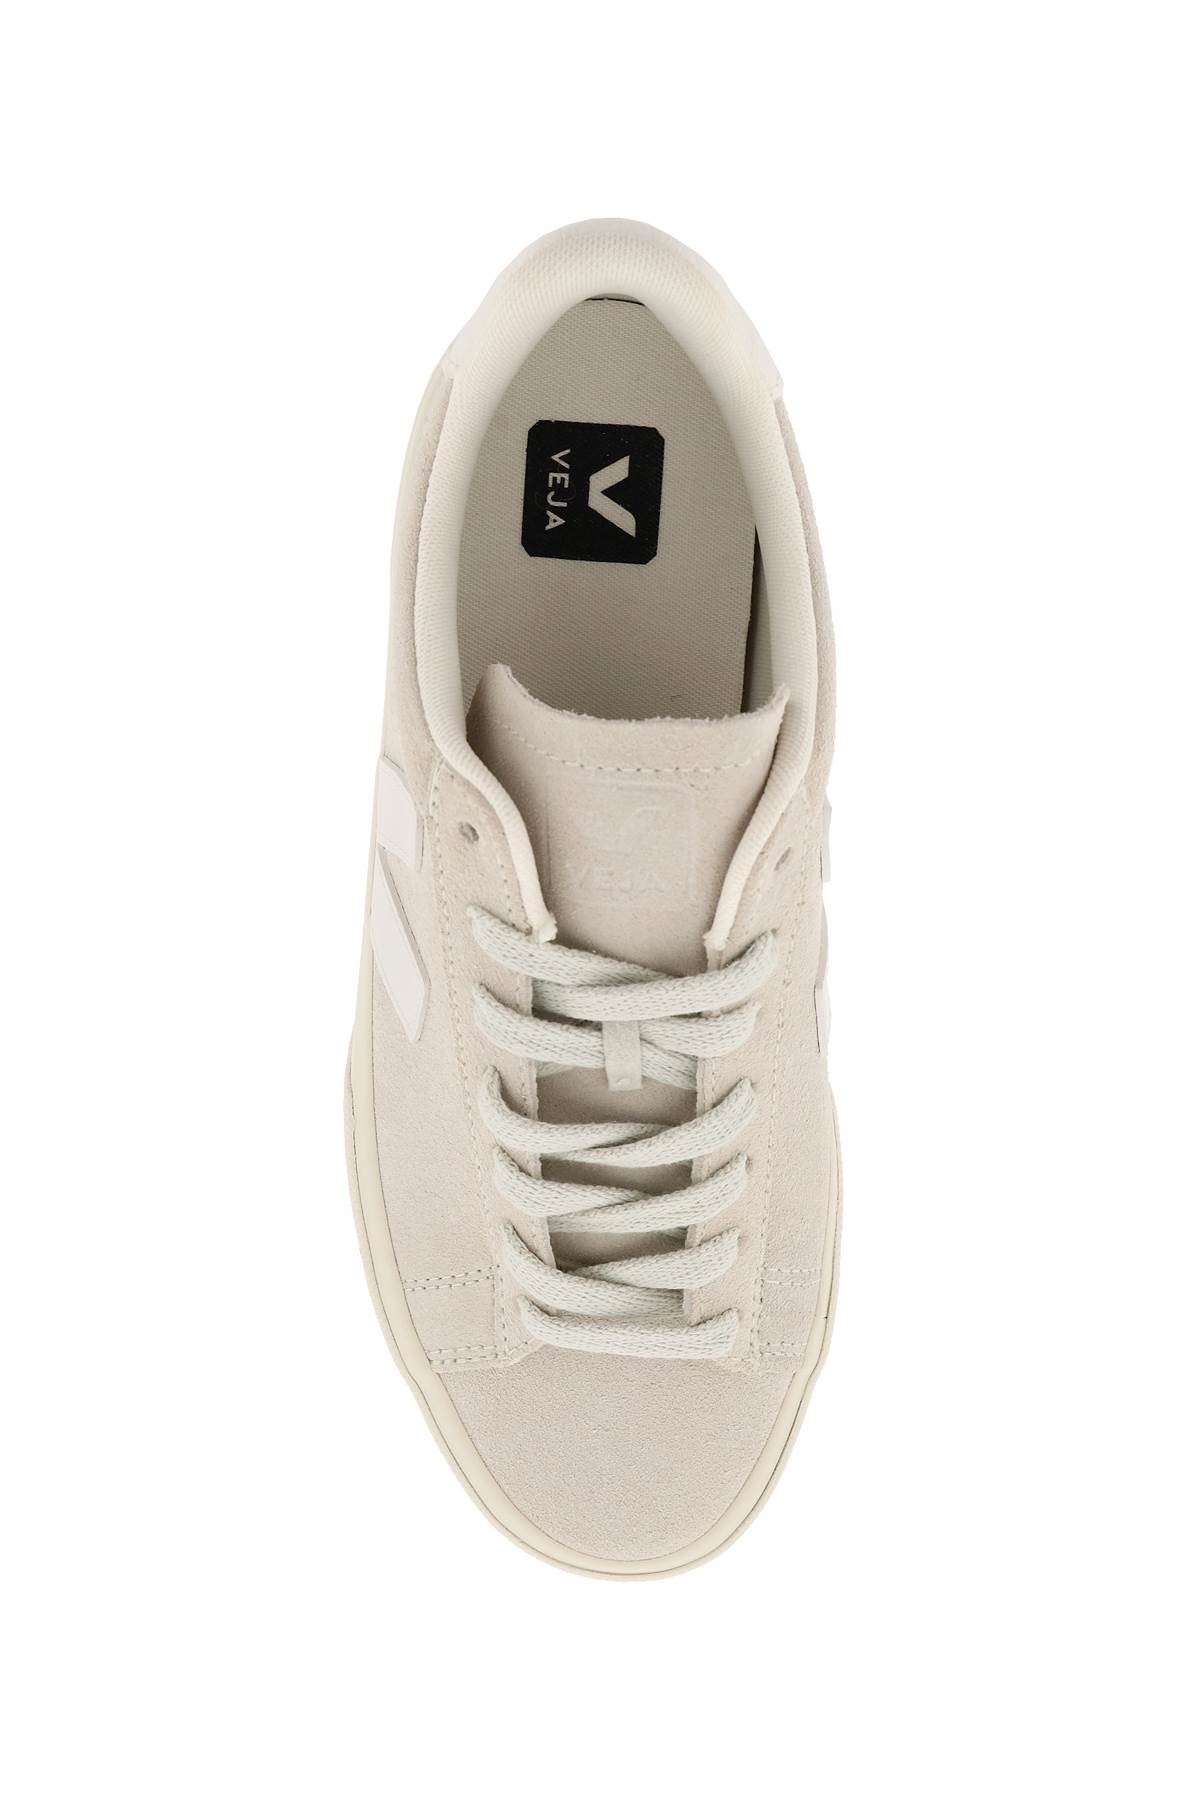 Shop Veja Chromefree Leather Campo Sneakers In Natural White (grey)